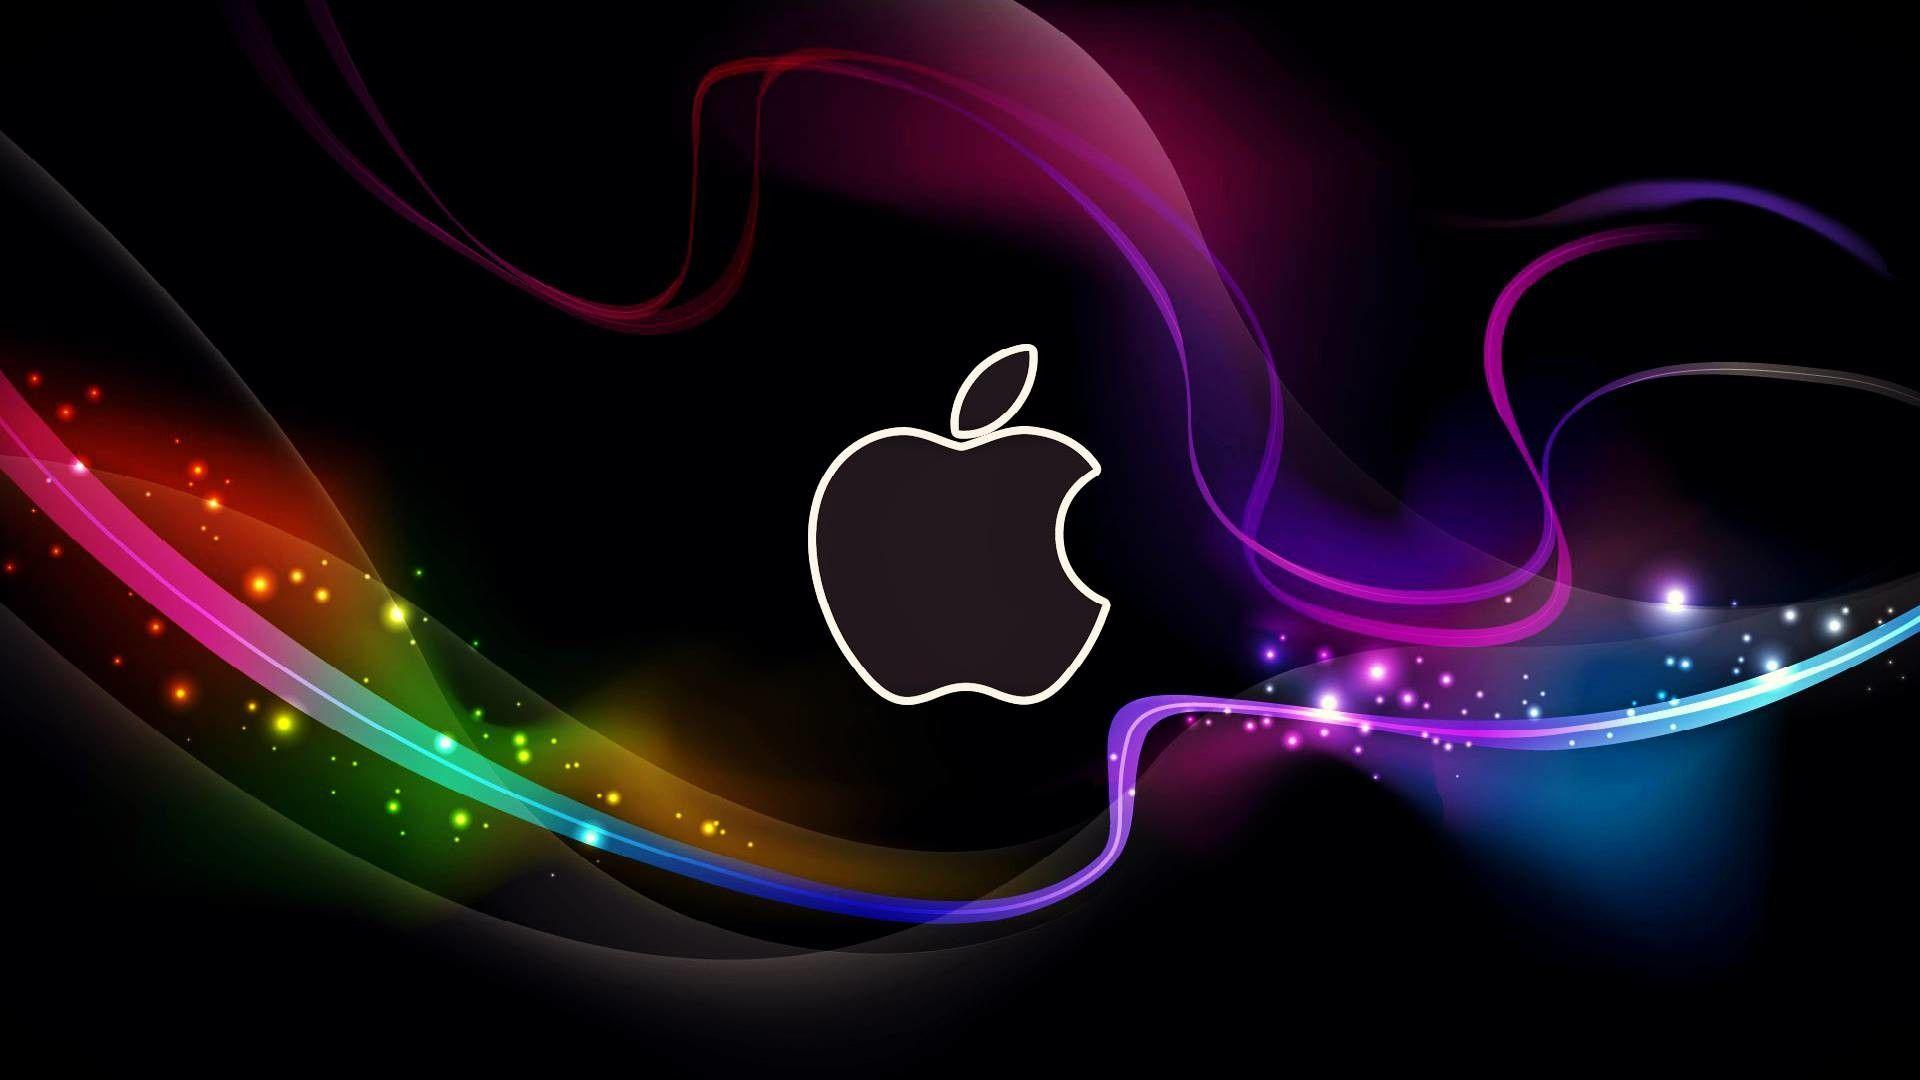 Cool Apple Logo Backgrounds - Wallpaper Cave